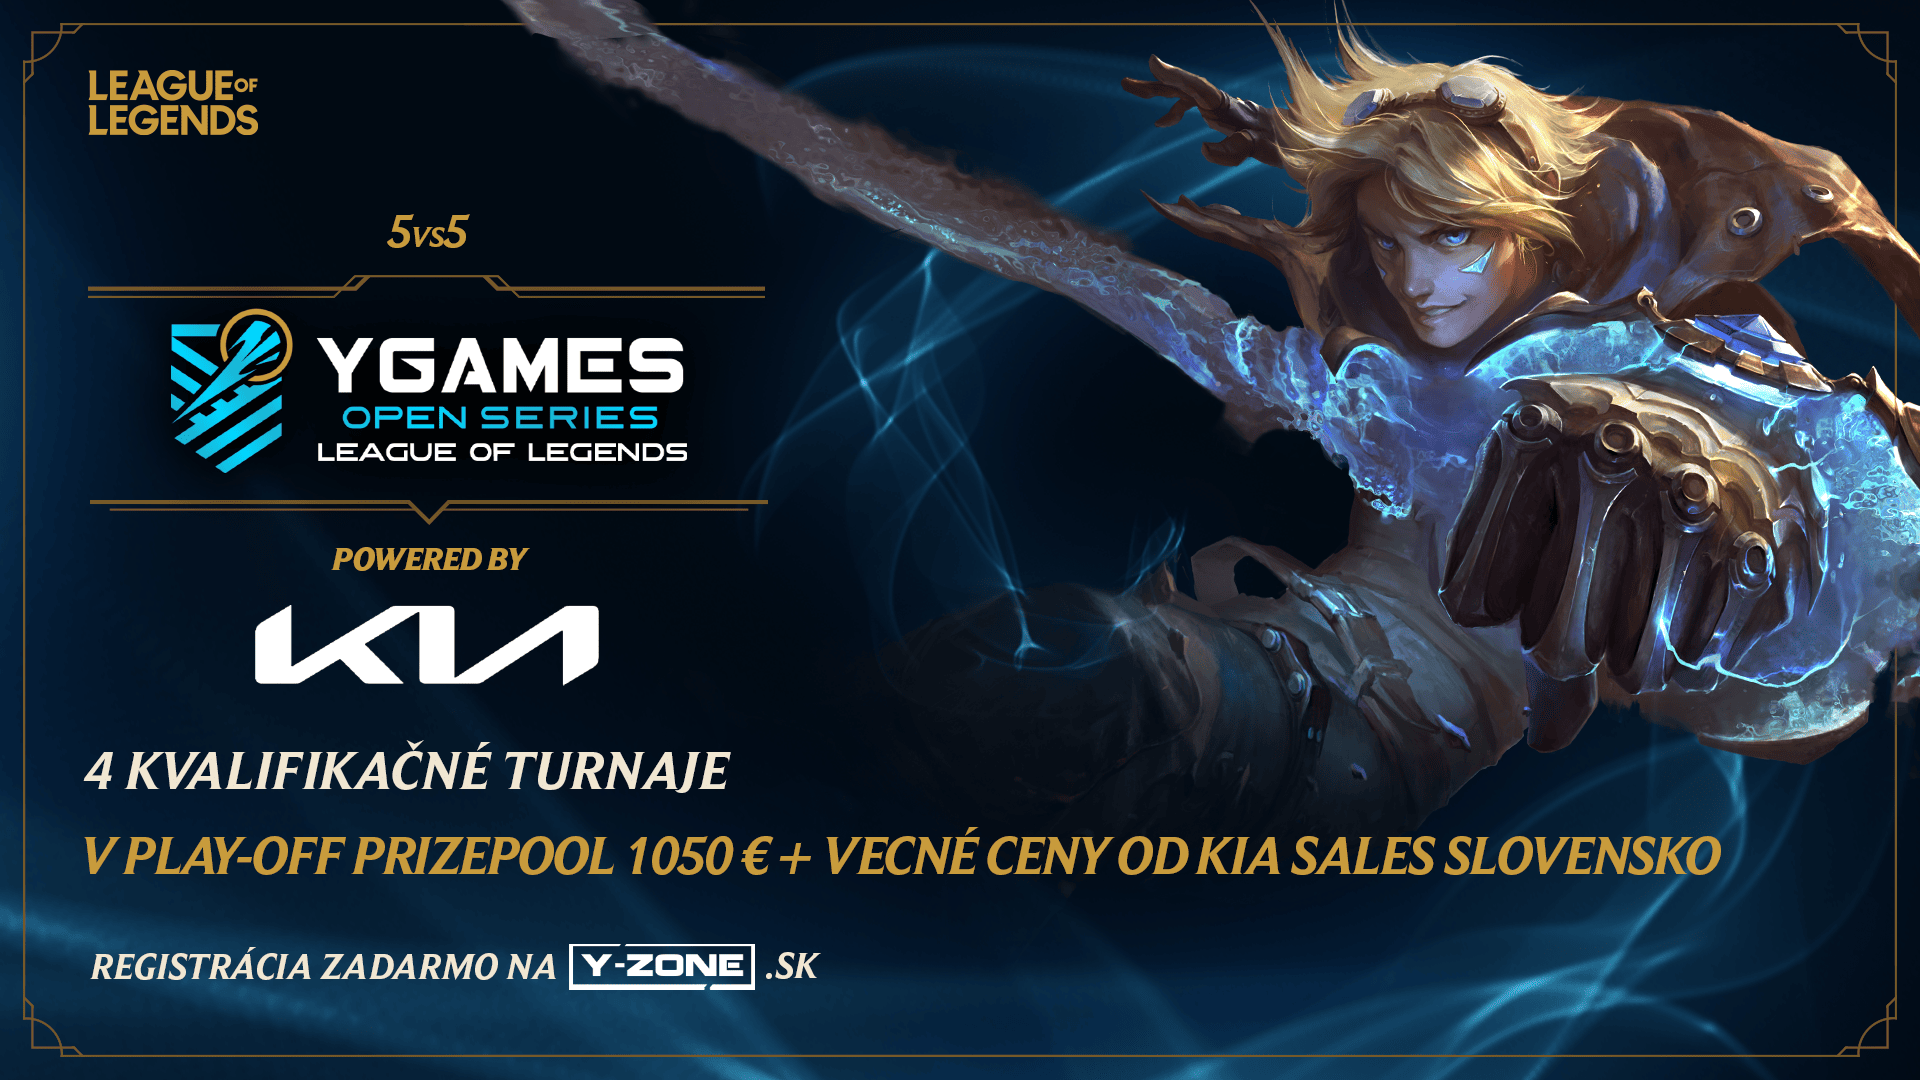 YGames Open Series powered by Kia.